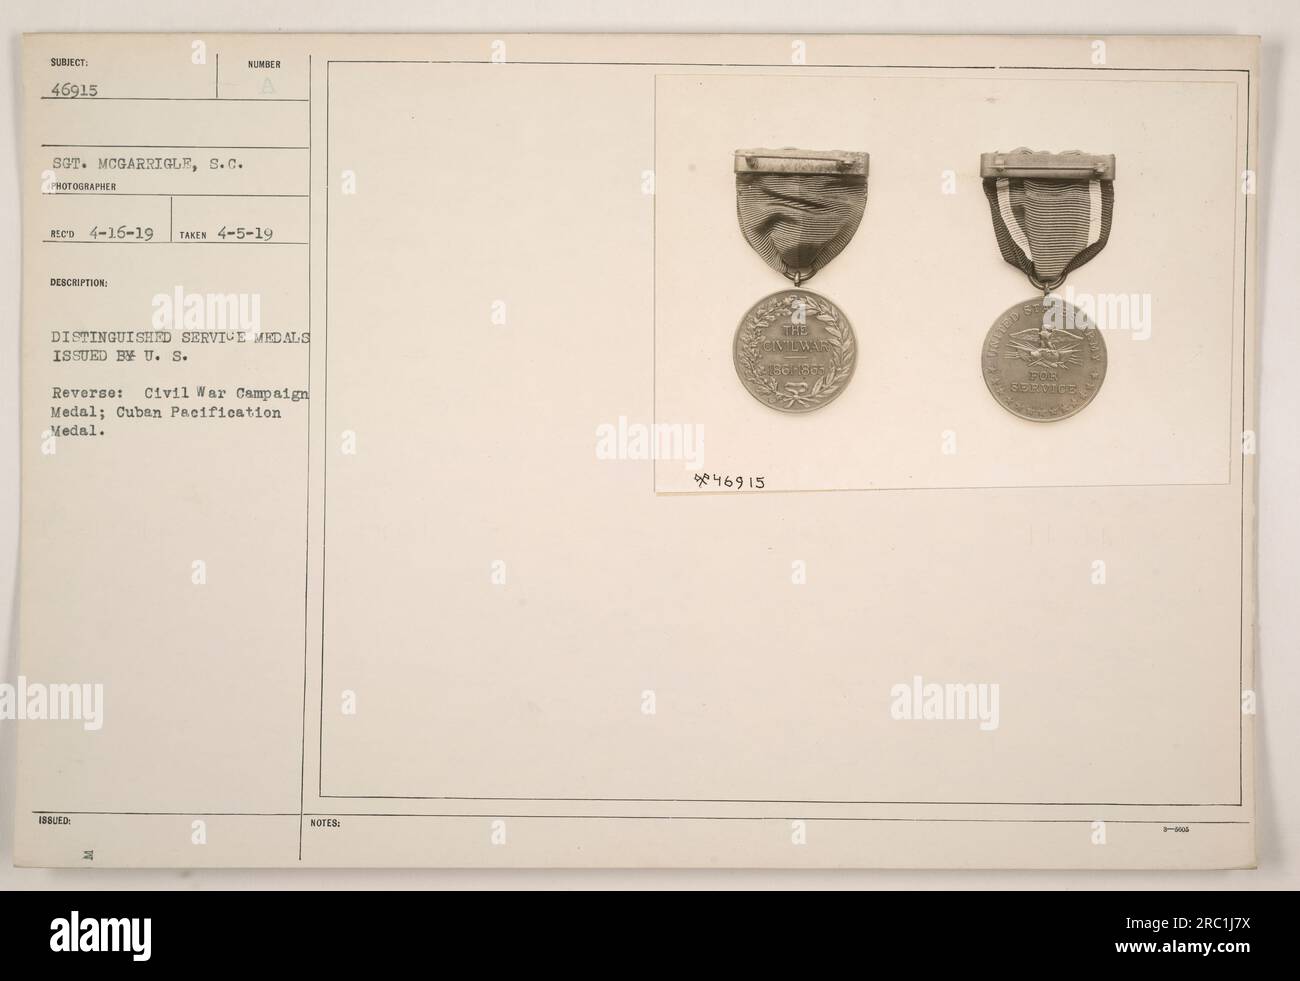 In this photograph, Distinguished Service Medals issued by the U.S. are displayed. The reverse side shows a Civil War Campaign Medal and a Cuban Pacification Medal. There is a label that reads 'SOT. MCGARRIGLE, S.C. PHOTOGRAPHES RECO 4-16-19 TAKEN 4-5-19.' These medals are a recognition of the recipient's distinguished service in various military operations, including the Civil War campaign and the Cuban pacification. Stock Photo